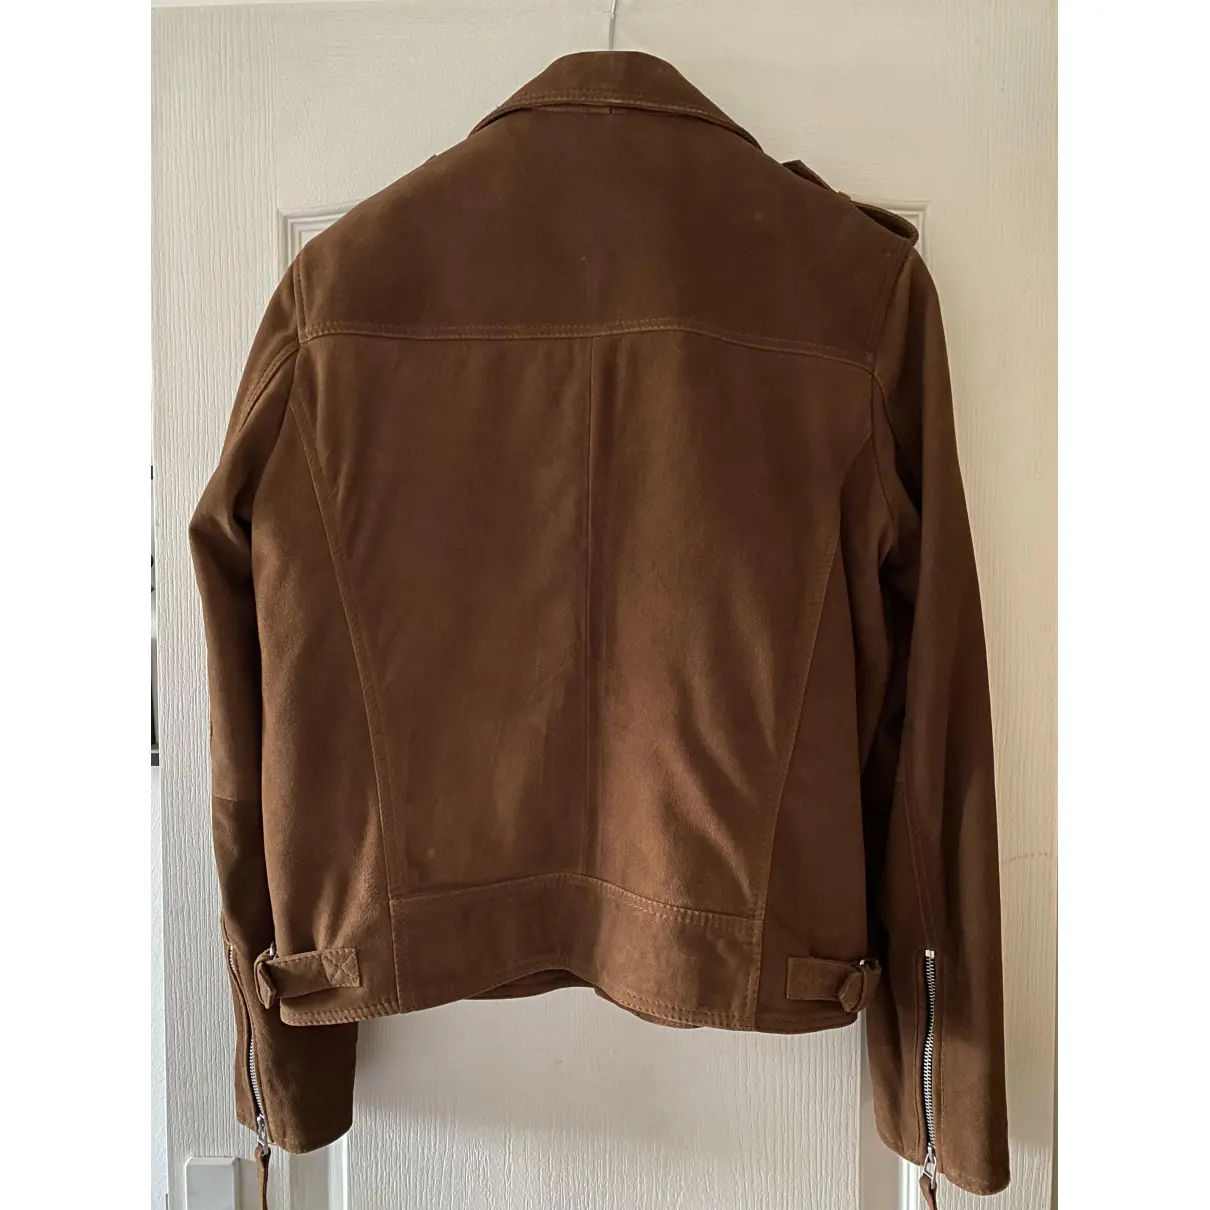 Buy Each x Other Leather jacket online